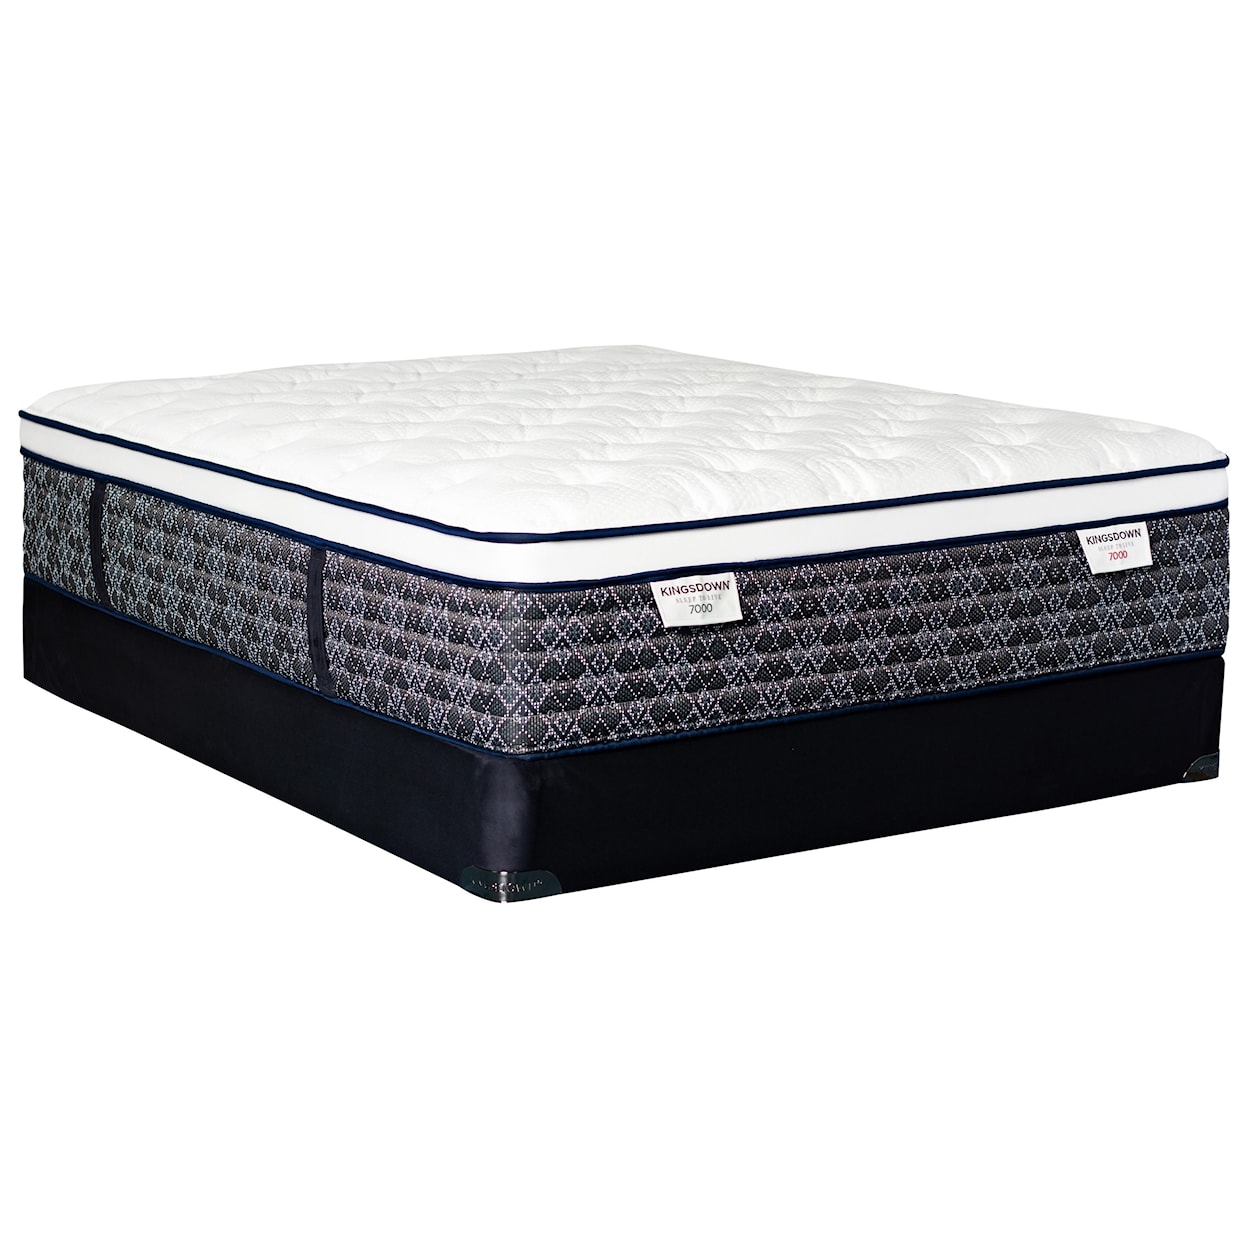 Kingsdown Sleep to Live 7000 Gold Blue ET Queen Pocketed Coil Mattress LoPro Set